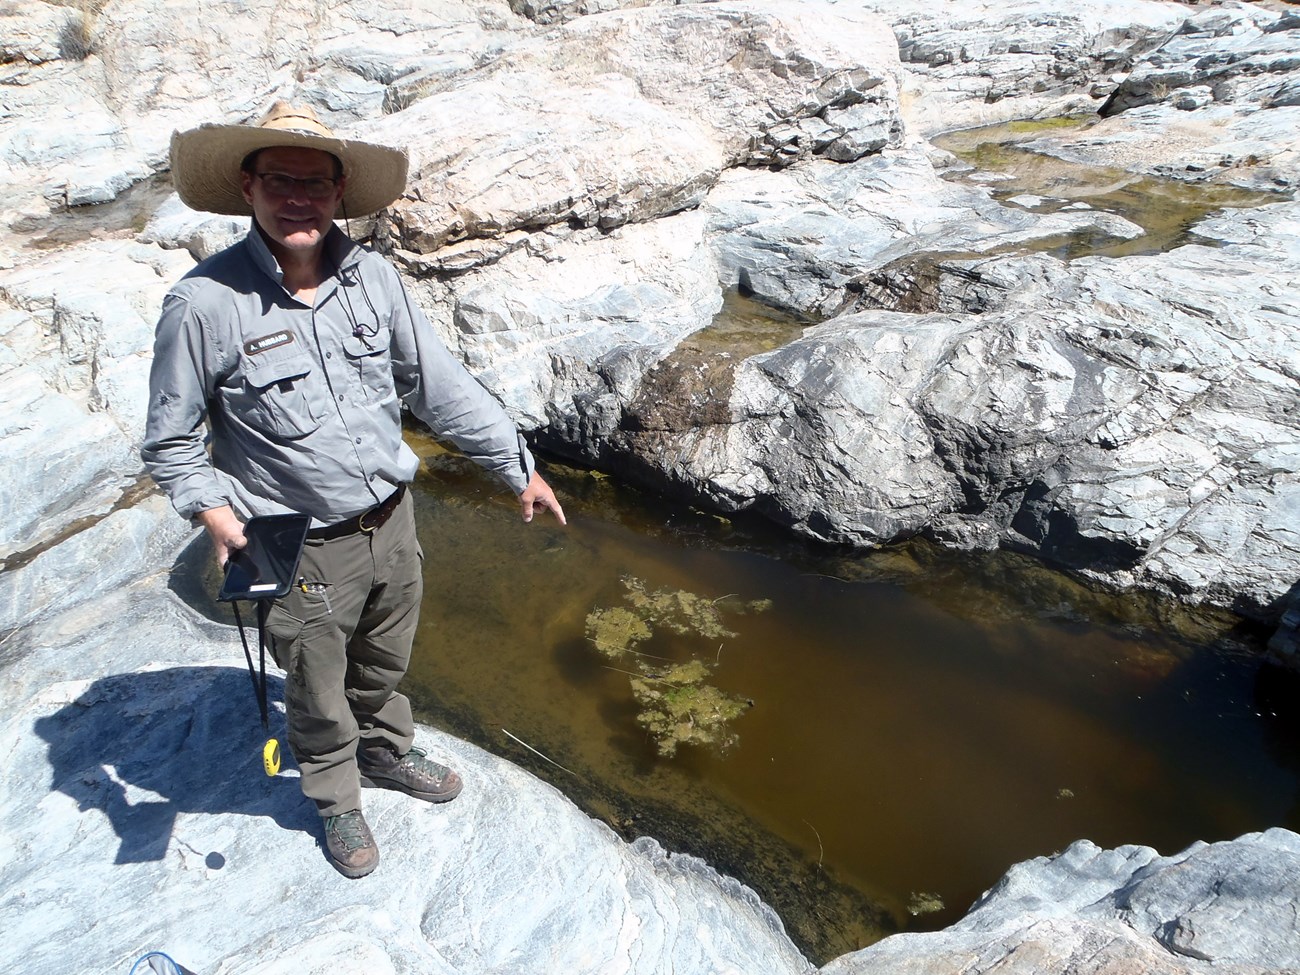 Park scientist pointing at a large pool of water in a bedrock depression.